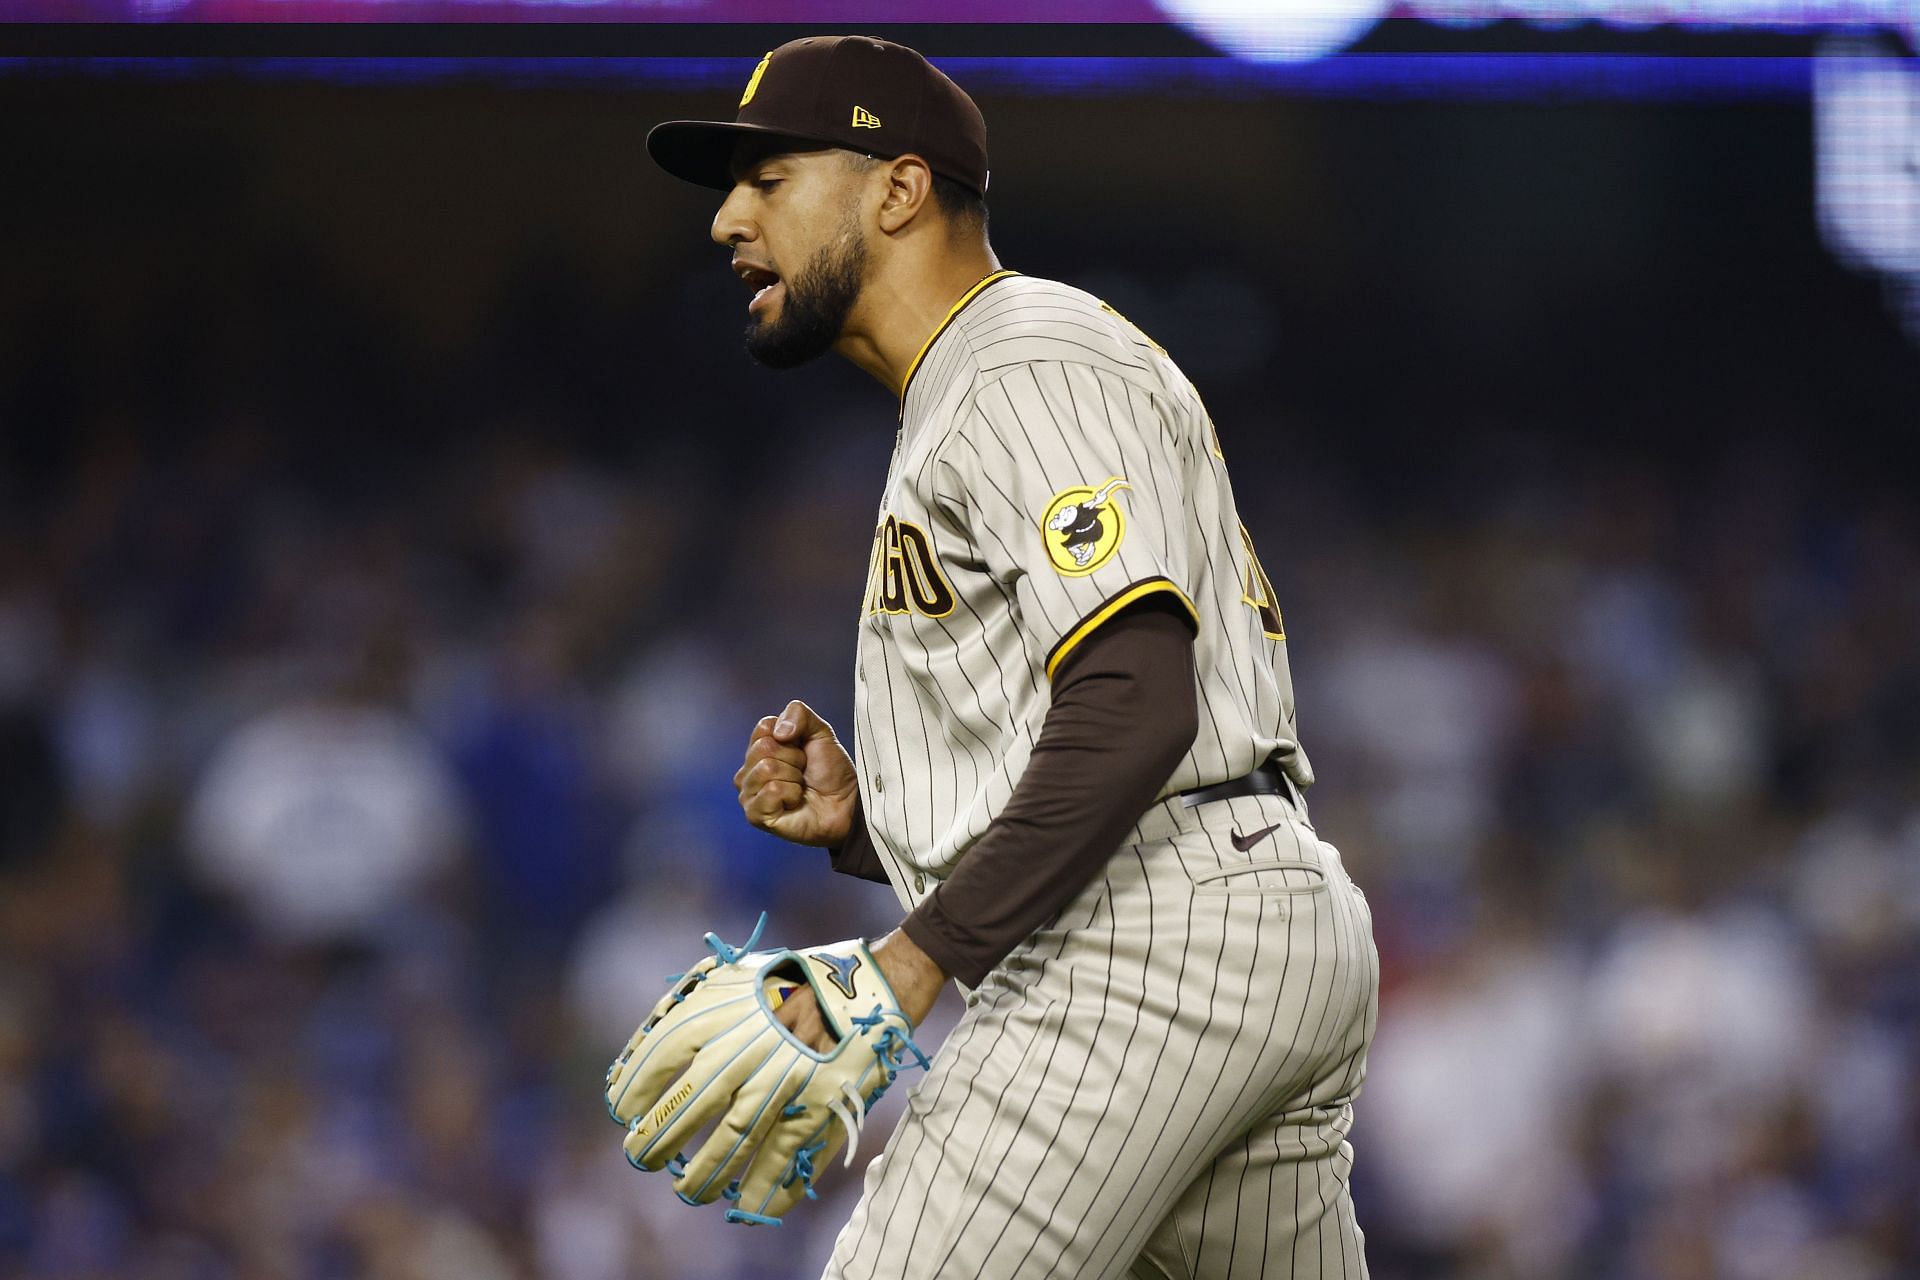 Robert Suarez contract: A look at the Padres pitcher's lucrative new deal